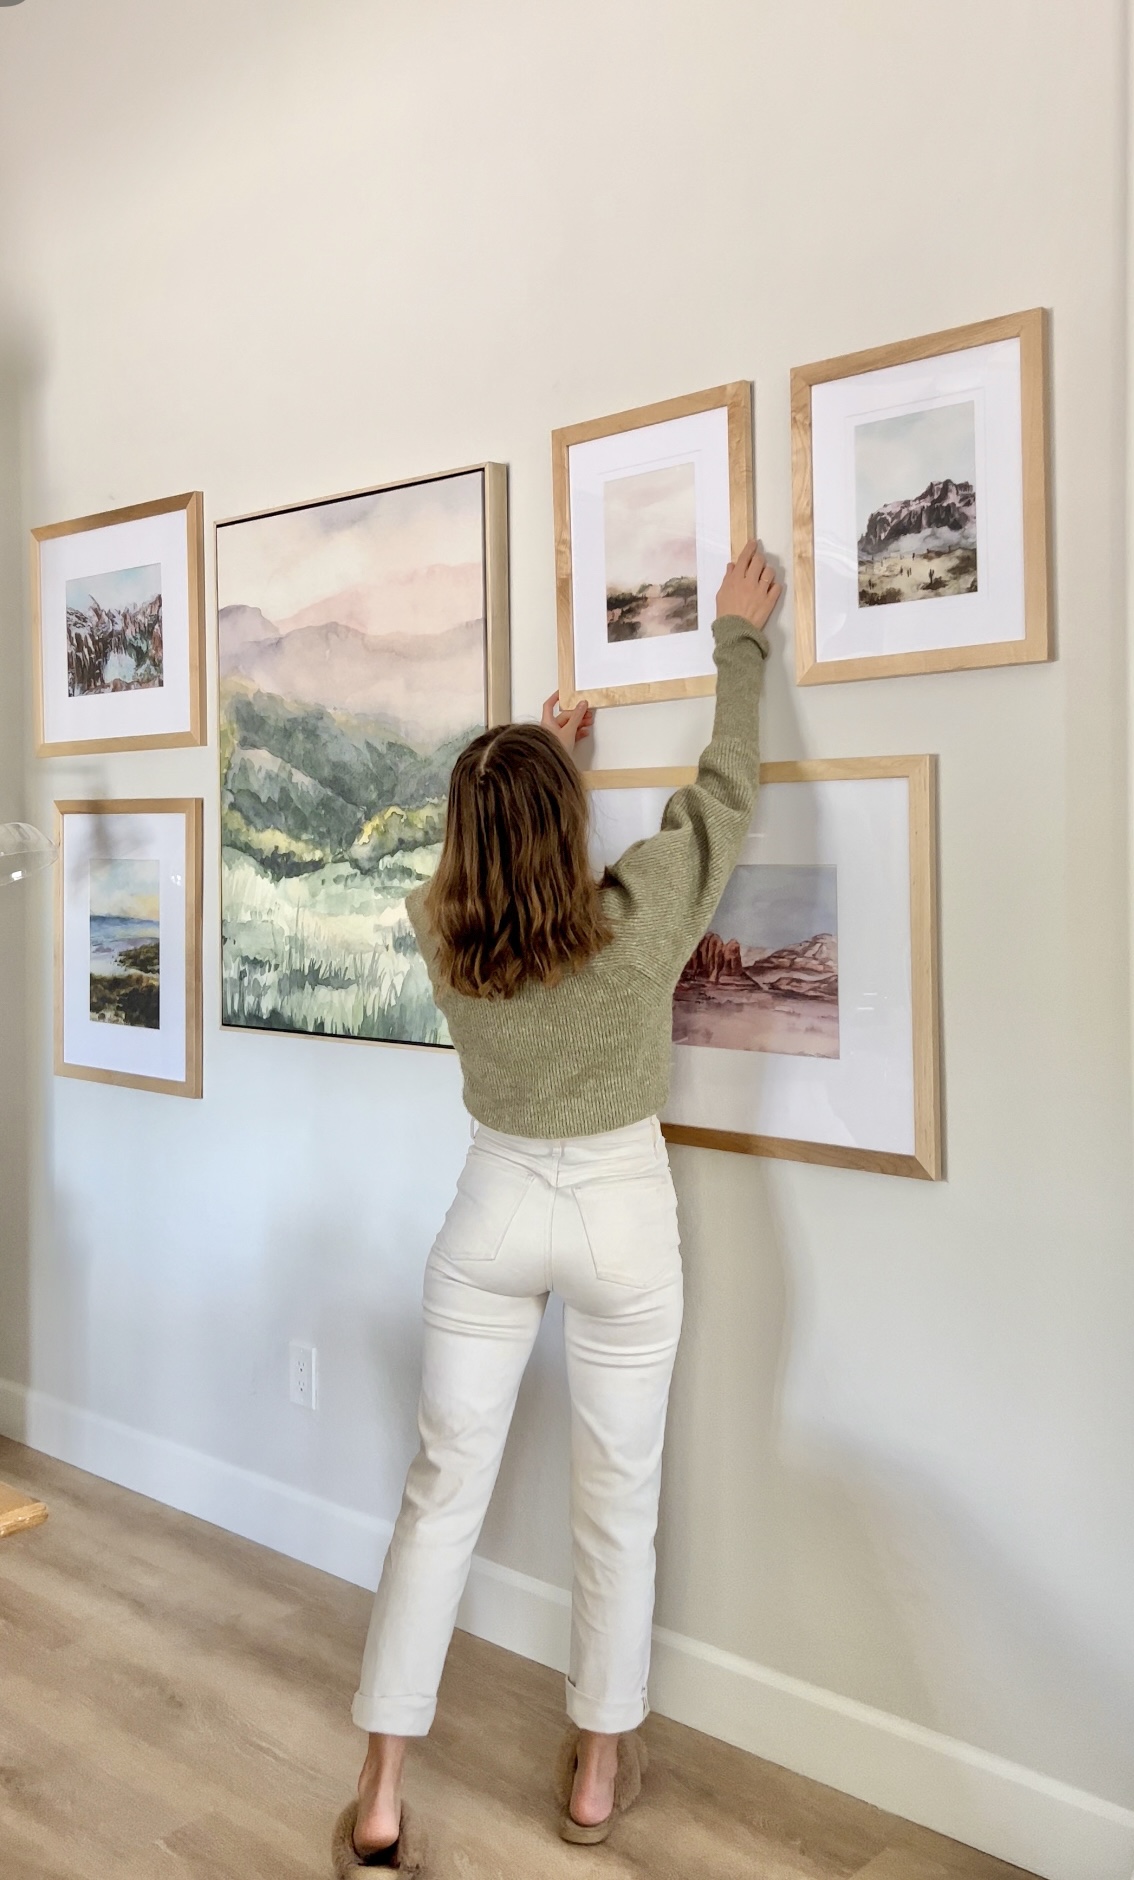 Hanging Pictures: How High Should I Hang My Frames? - Learn the perfect hanging height for all rooms and wall sizes!